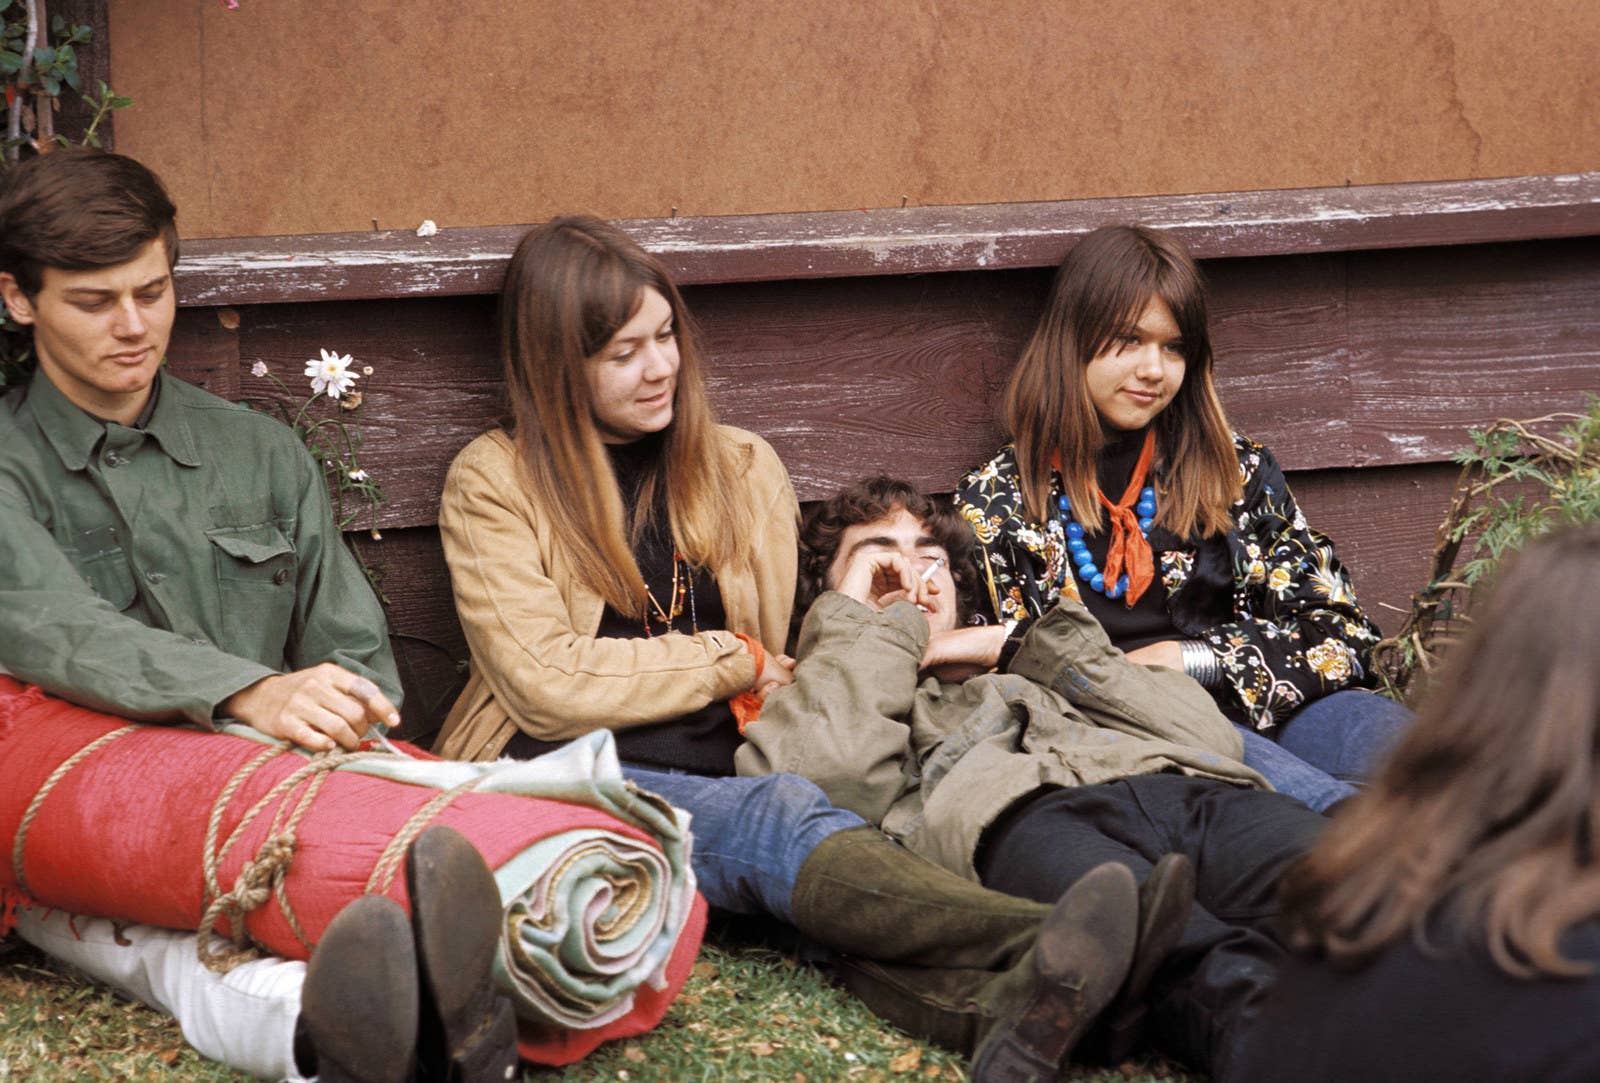 A group of hippies hang out during the Monterey Pop Festival.